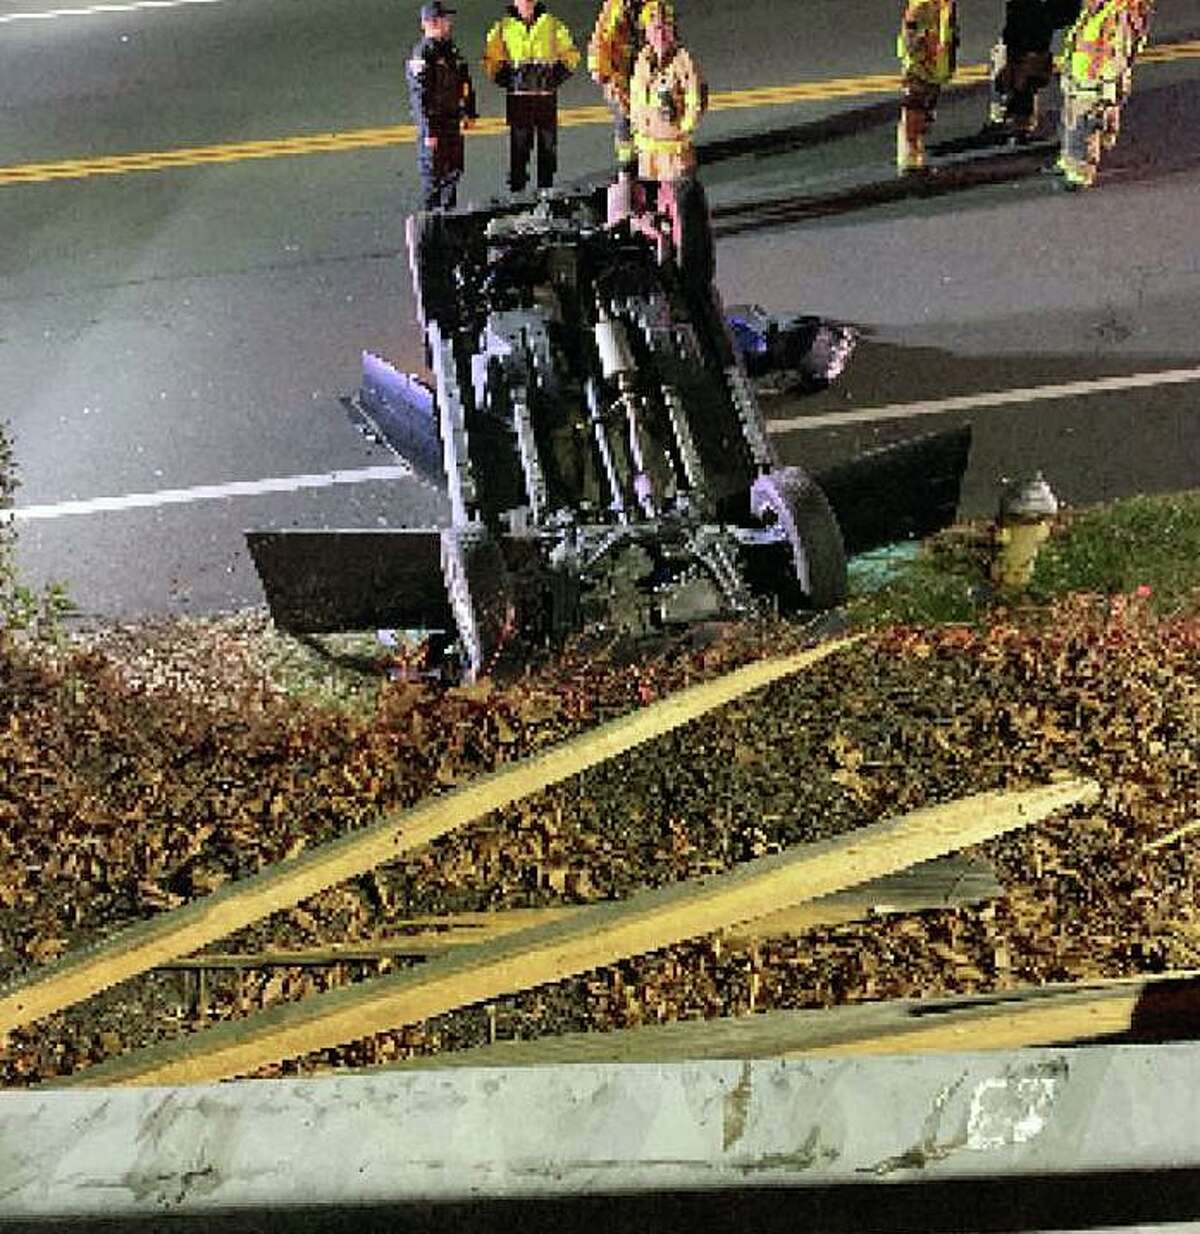 Fire officials said a vehicle drove through a barrier and fell about 12 feet in Shelton, Conn., on Sunday, Dec. 5, 2021.